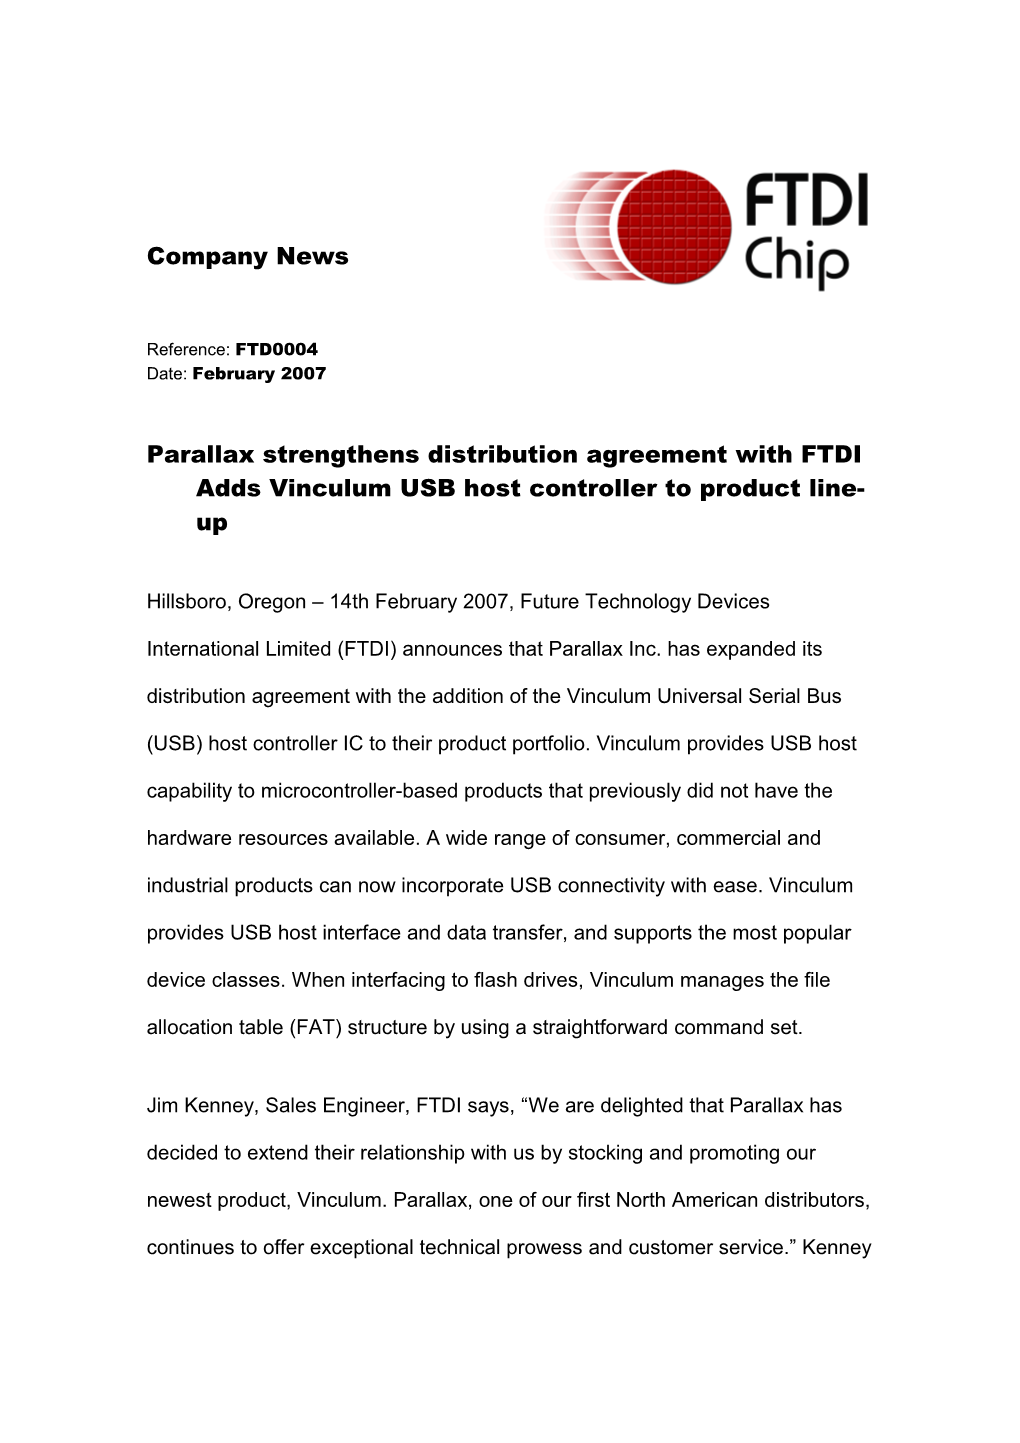 Parallax Strengthens Distribution Agreement with FTDI Adds Vinculum USB Host Controller